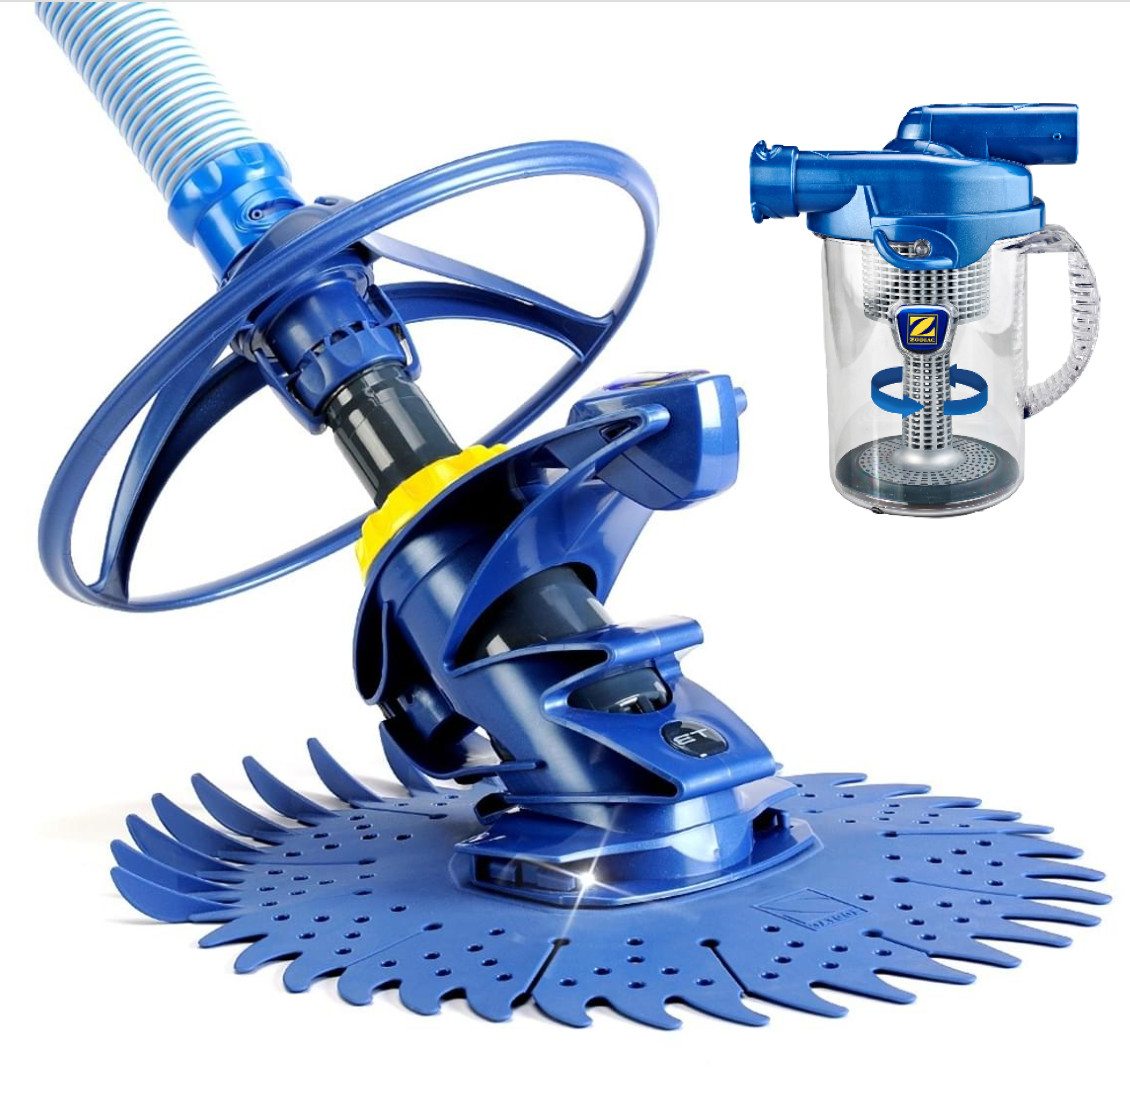 Zodiac T3 Pool Cleaner with Cyclonic Leaf Catcher